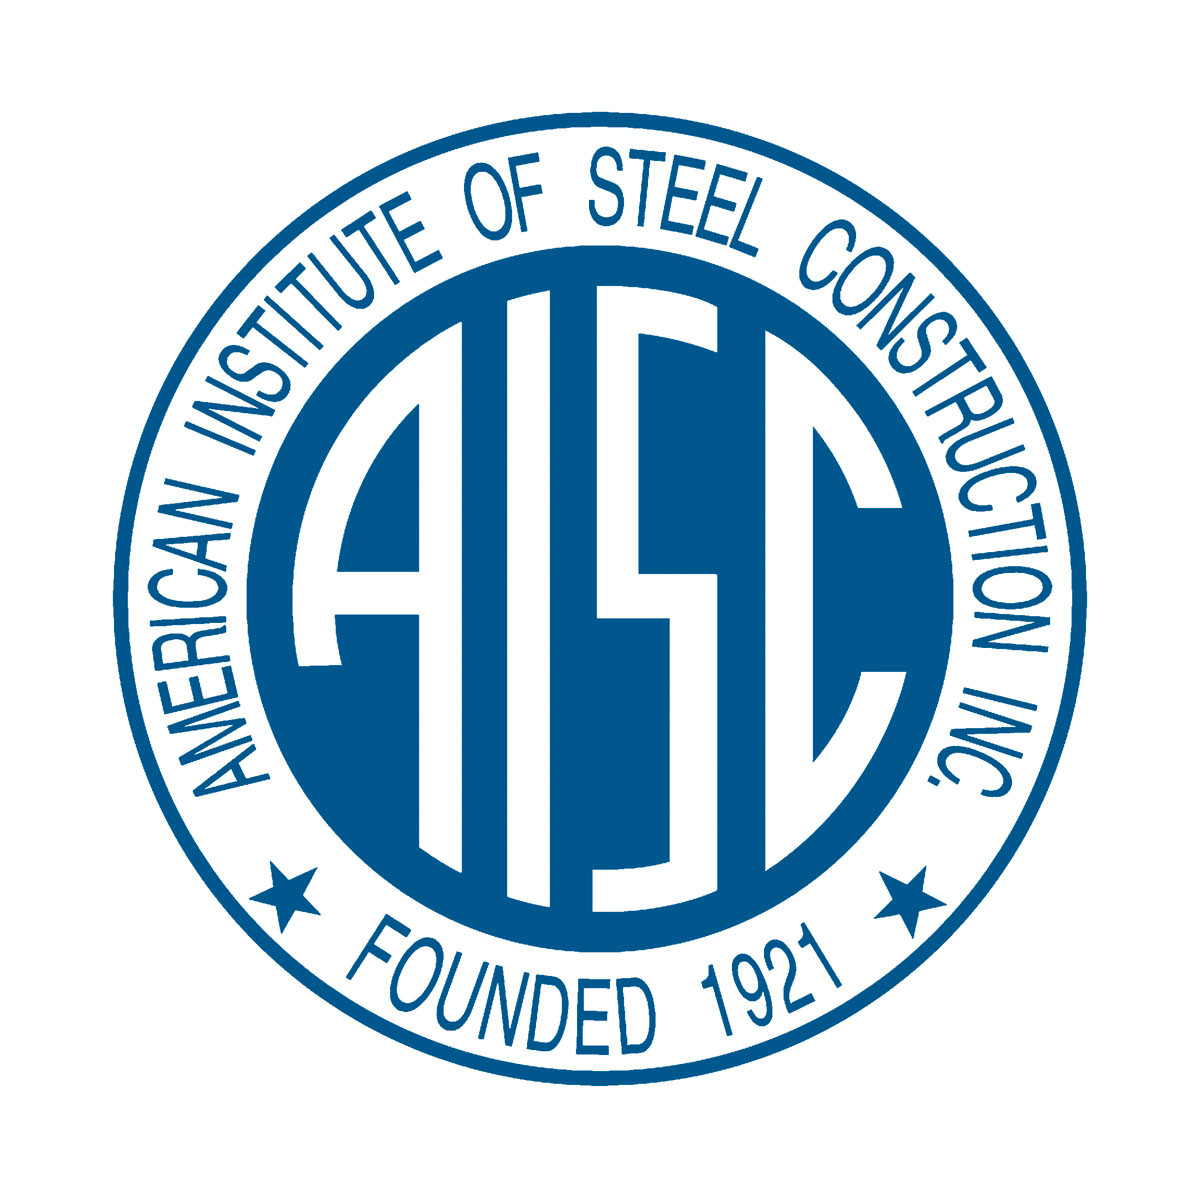 The American Institute of Steel Construction seeks assistance from BIM users in 